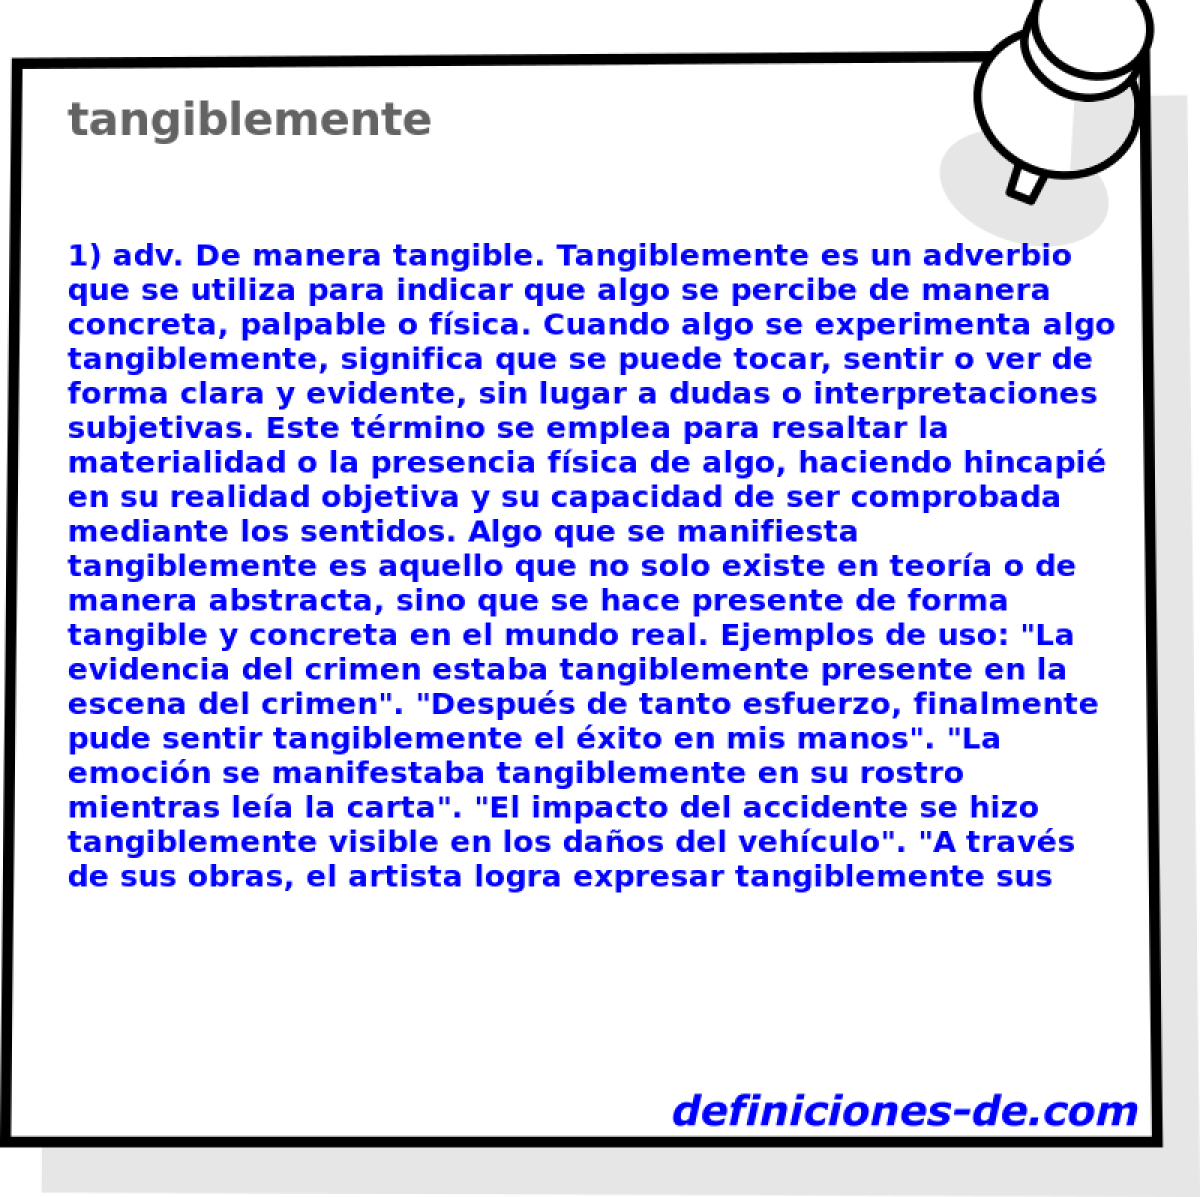 tangiblemente 